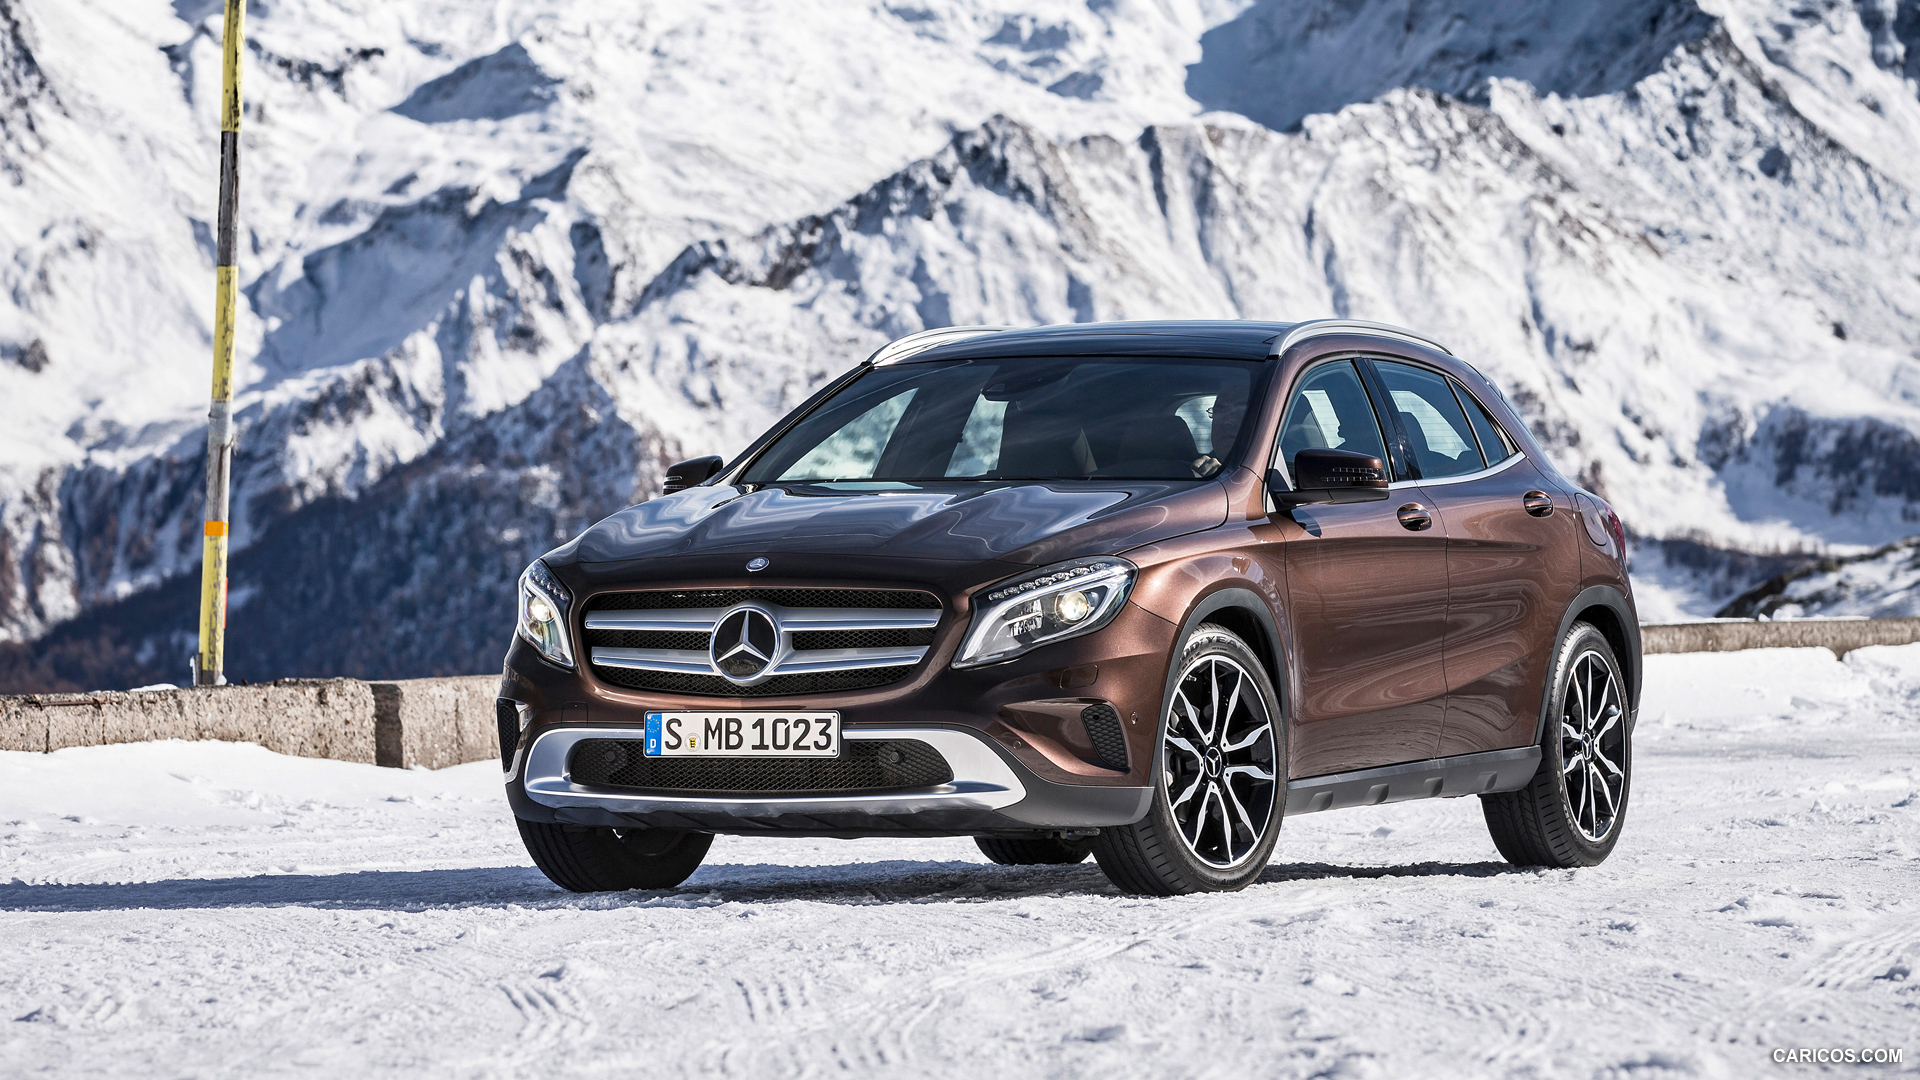 2015 Mercedes-Benz GLA 220 CDI 4MATIC - In Snow - Front, #66 of 71